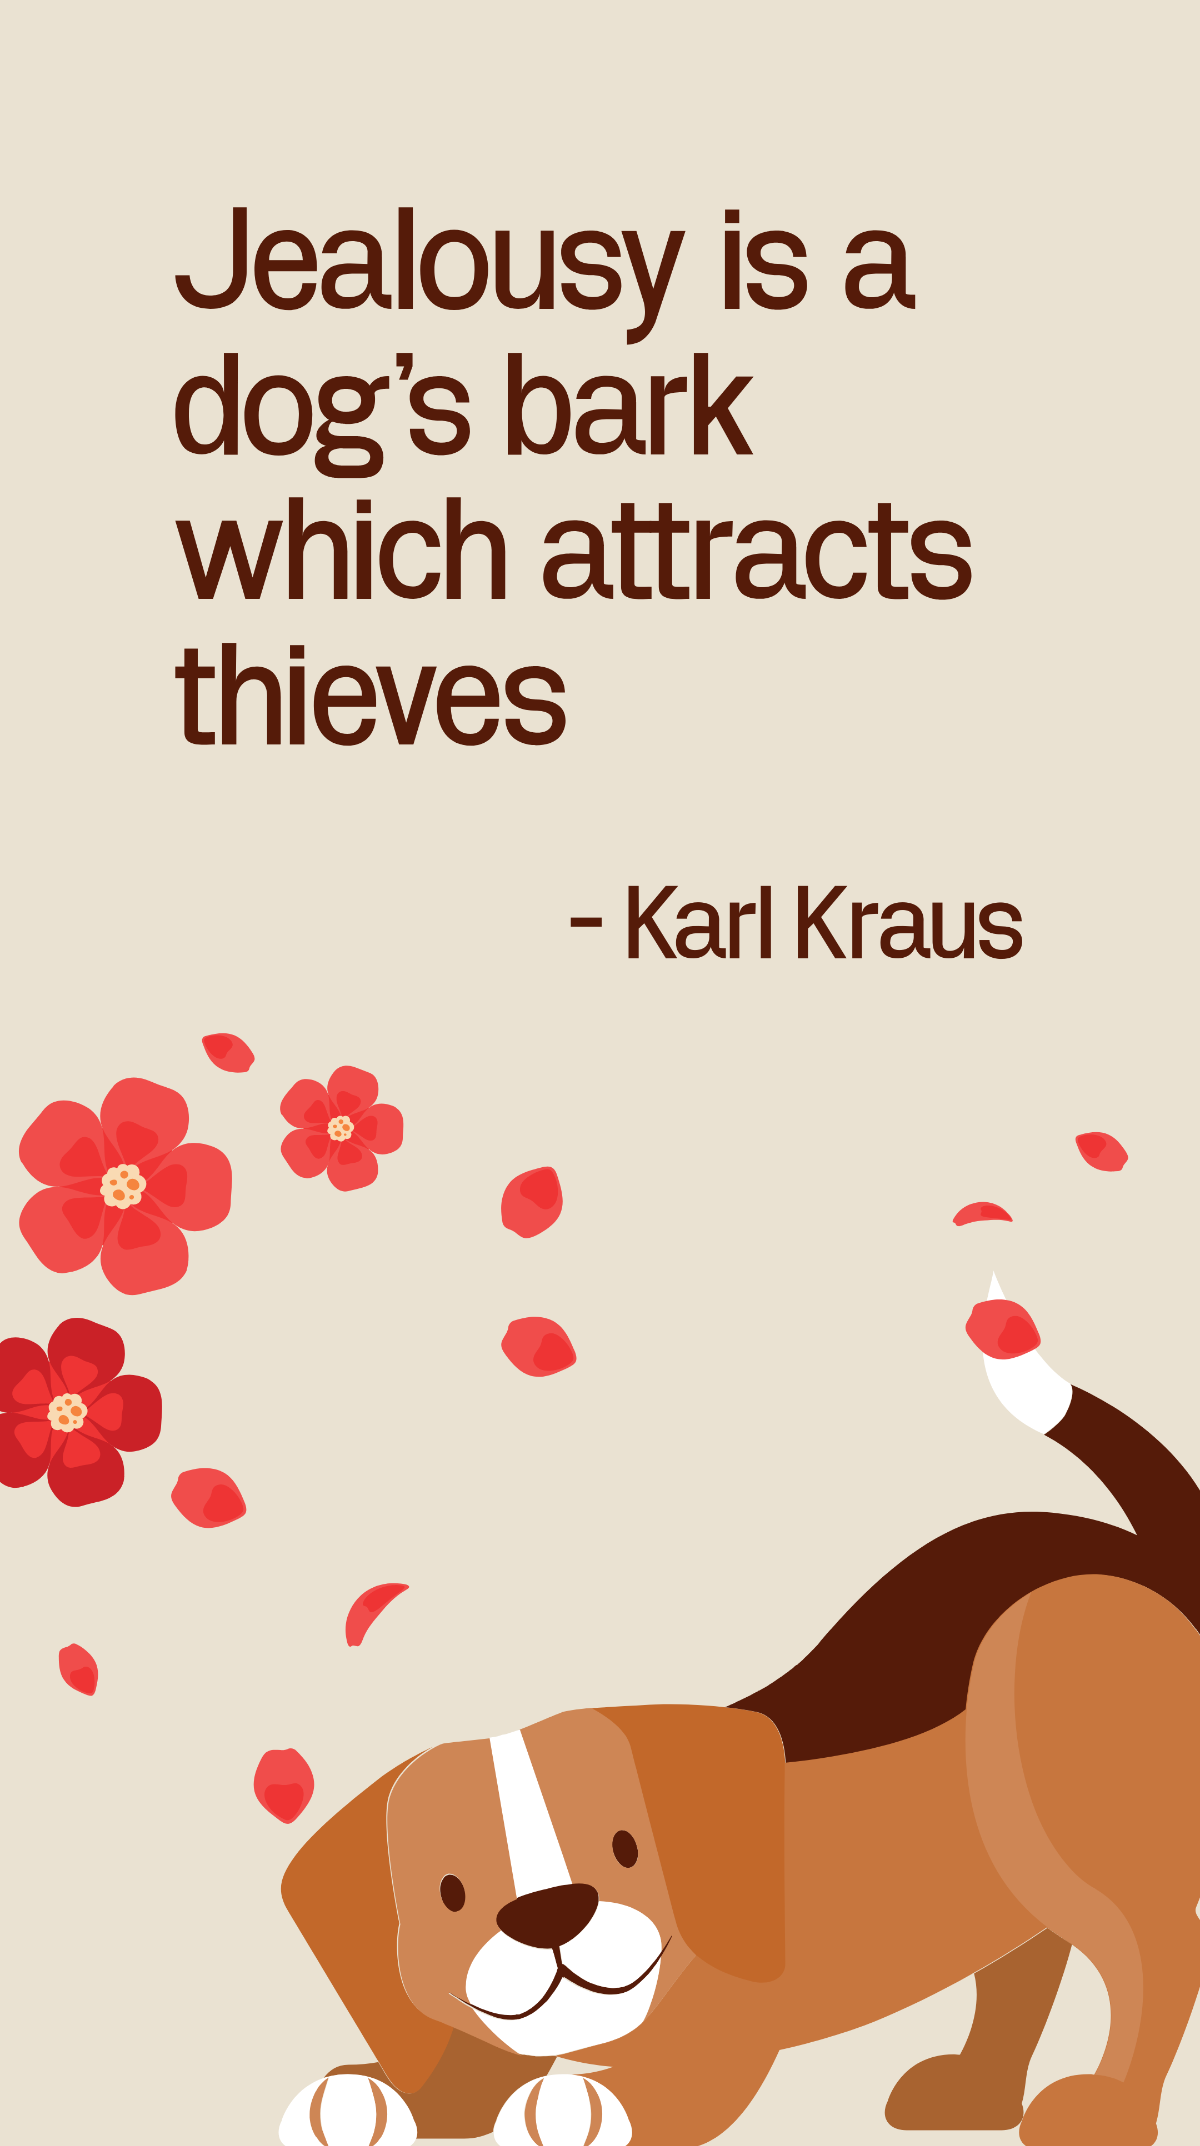 Karl Kraus - Jealousy is a dog's bark which attracts thieves Template